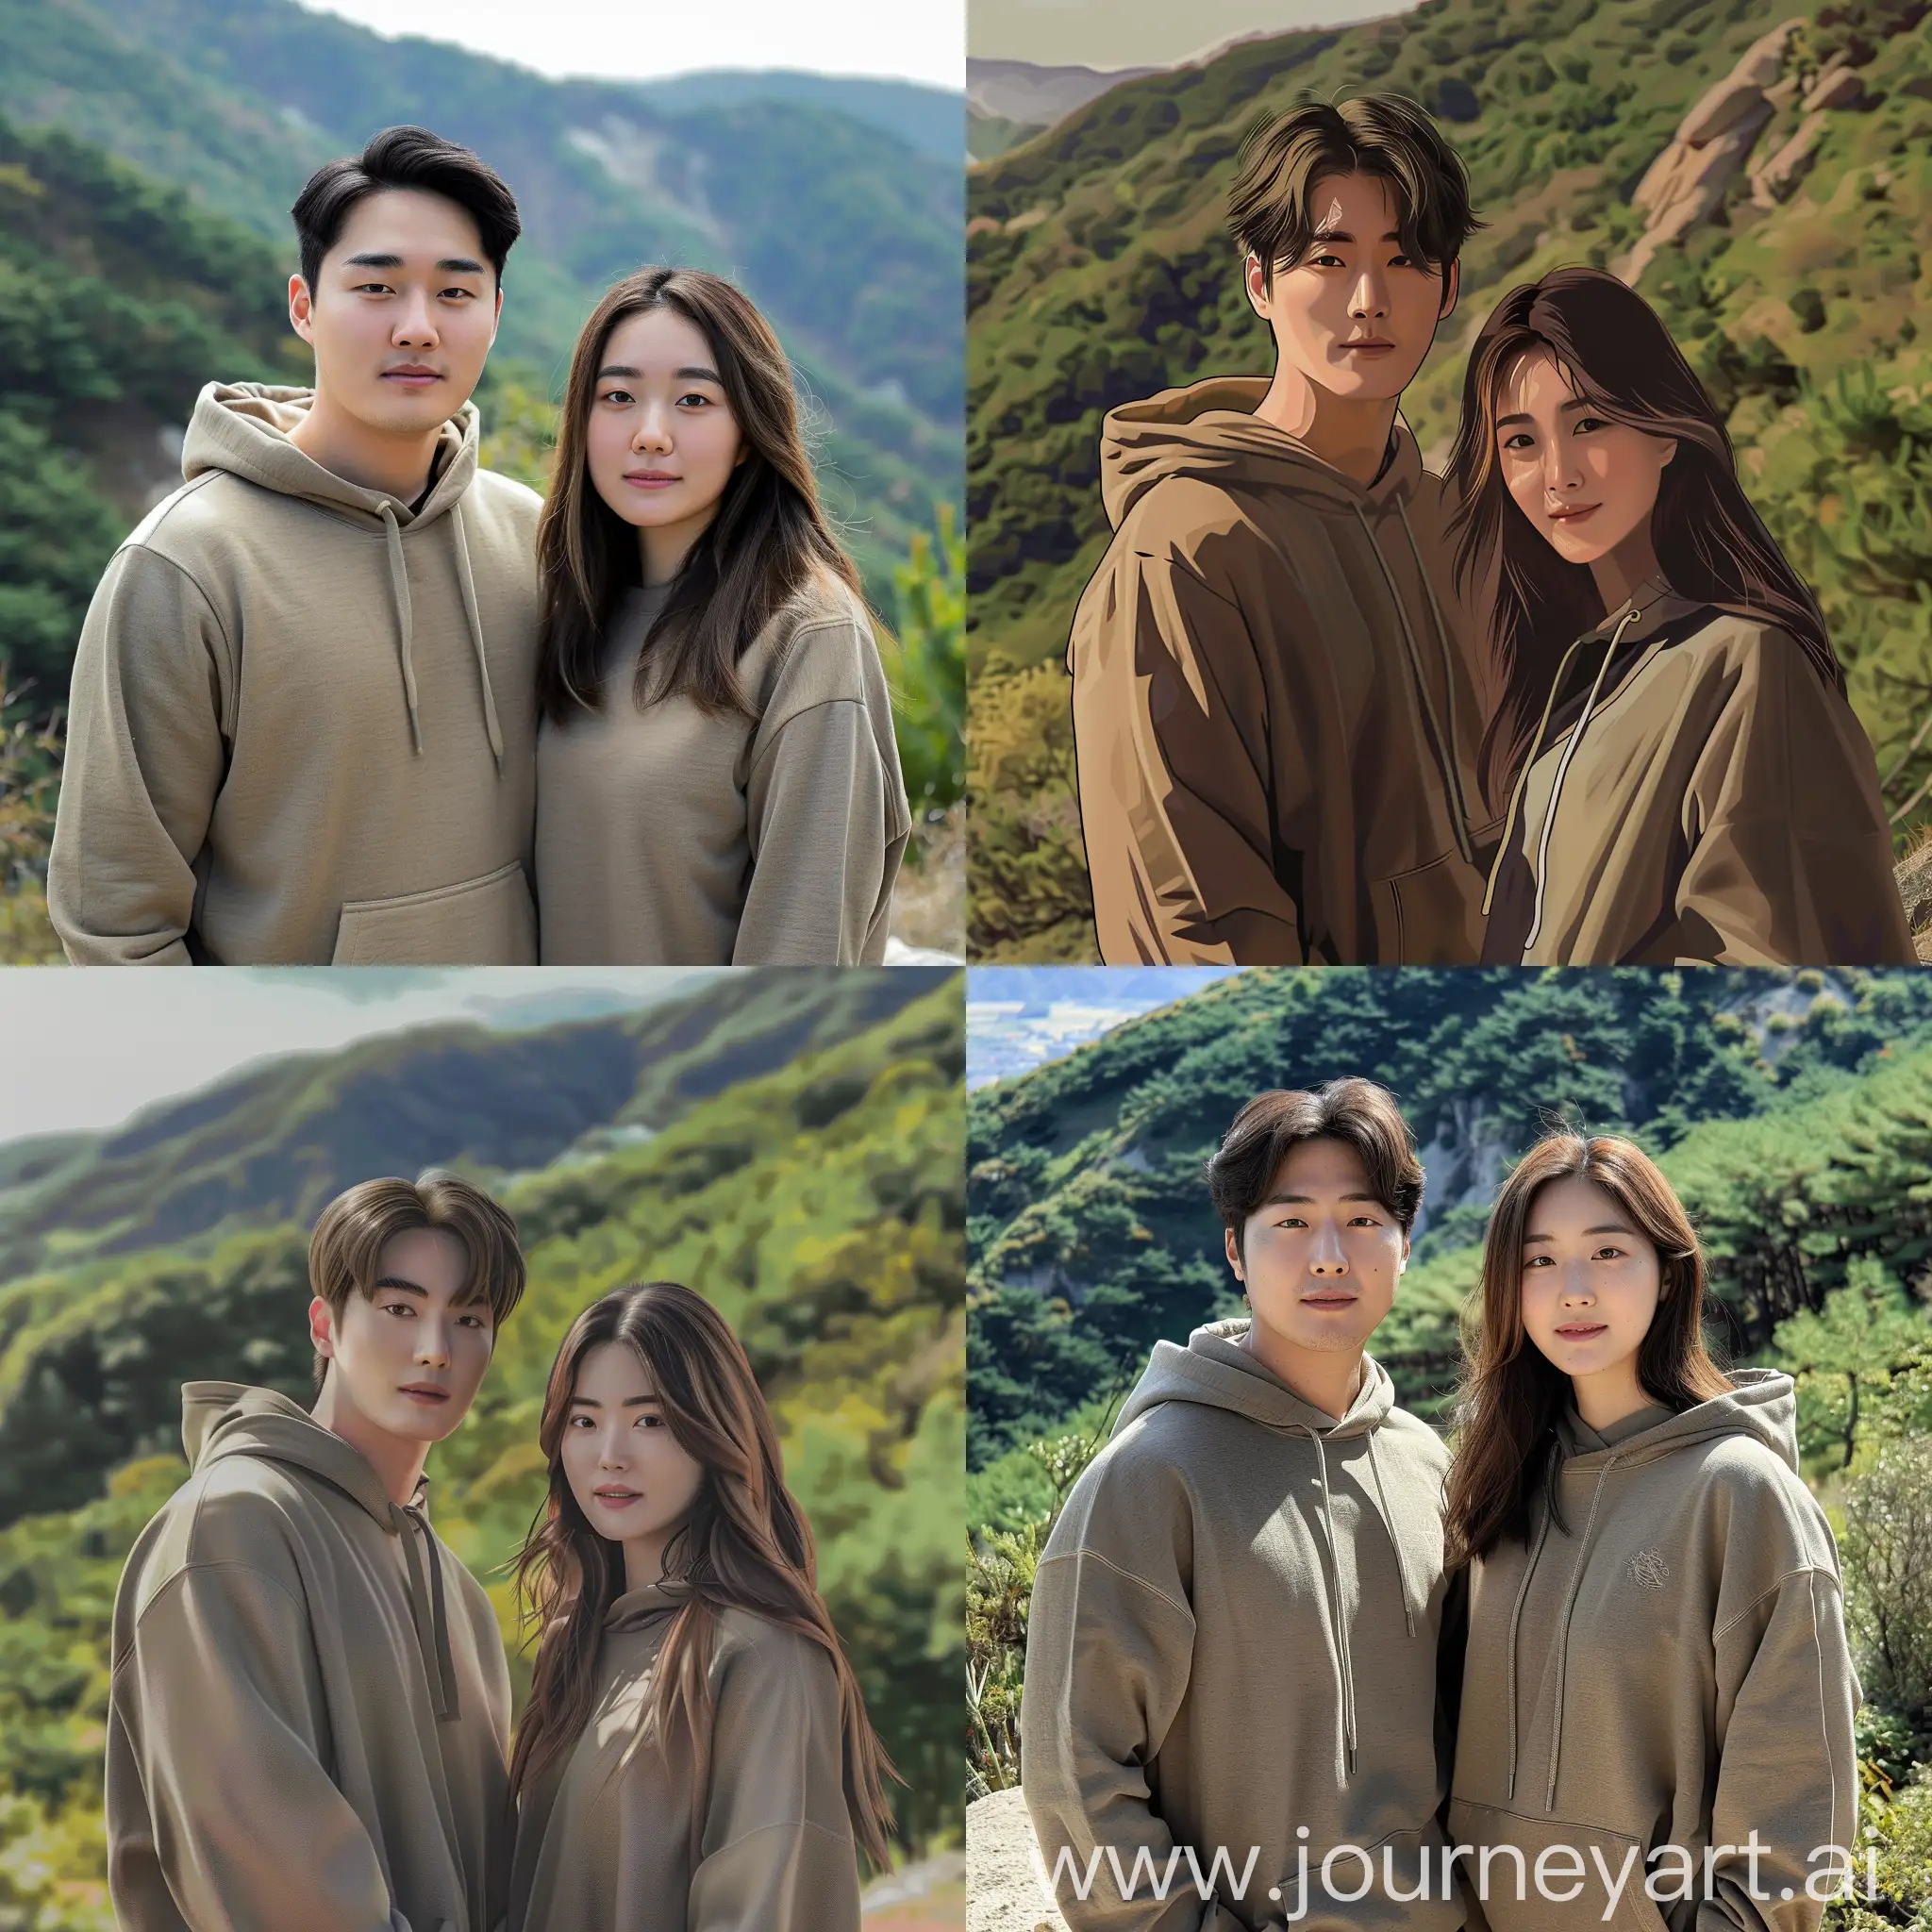 A couple from Korea, the man is 35 years old and the woman is 32 years old. The man has a slightly slim body, while the woman is chubby. The man has straight and neat hair, and the woman has long shoulder-length hair. They are wearing hoodies and standing on a hill mountain, with a background of green mountain and trees, in realistic HD. 